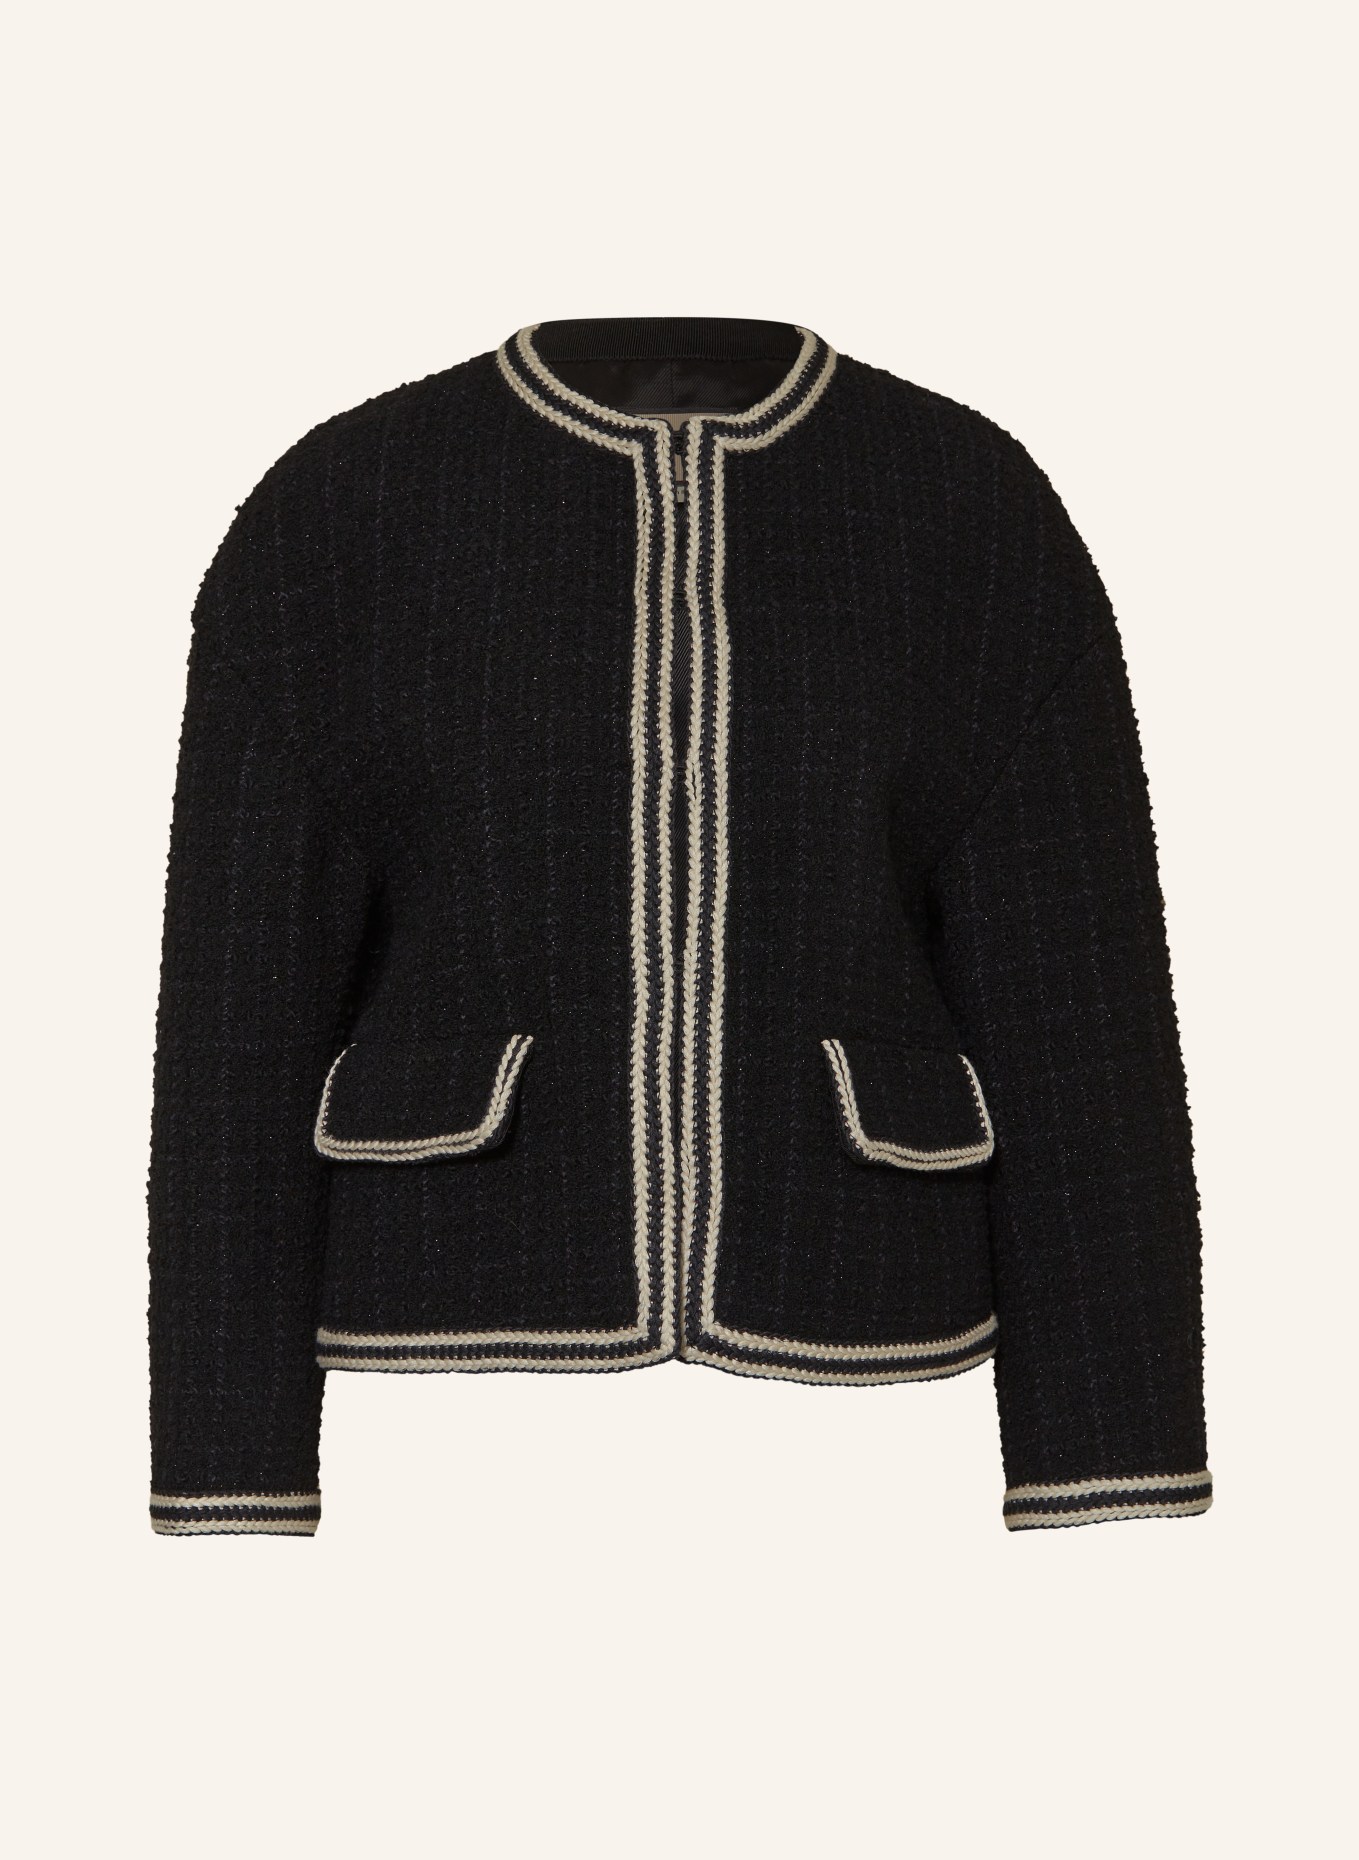 GUCCI Boxy jacket DAMIER made of tweed, Color: BLACK/ WHITE (Image 1)